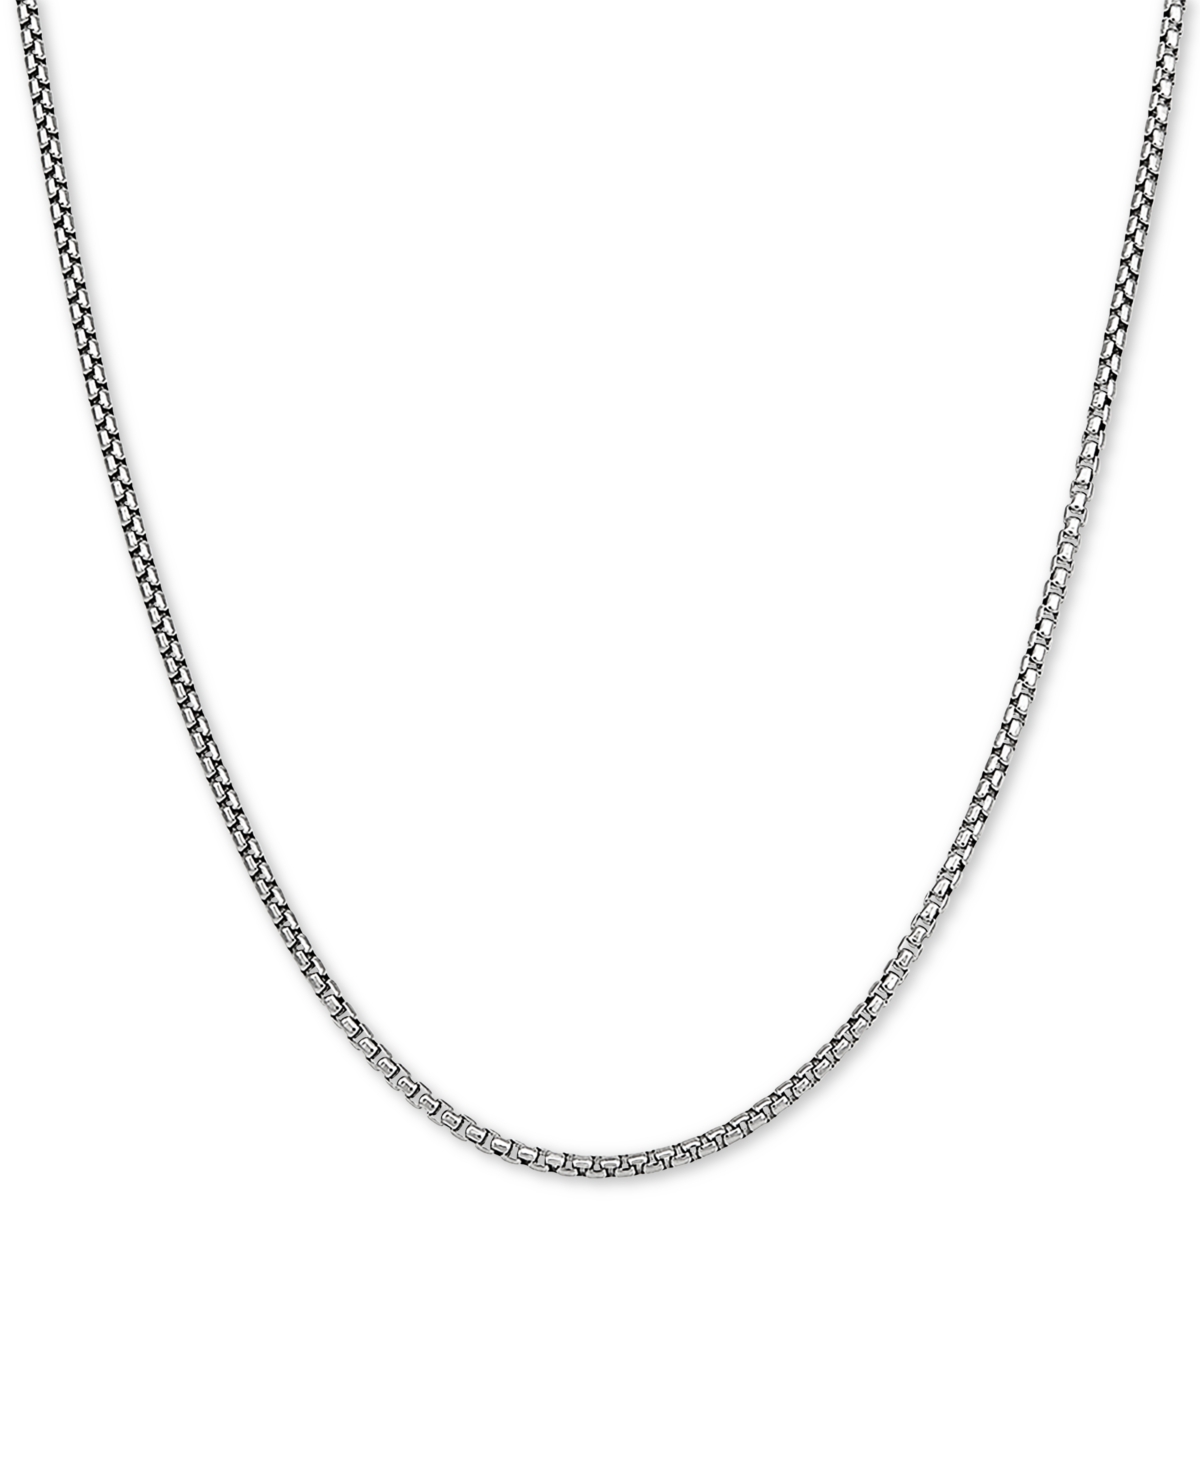 Rounded Box Link 18" Chain Necklace in Sterling Silver or 18k Gold-Plated Over Sterling Silver - Gold Over Silver